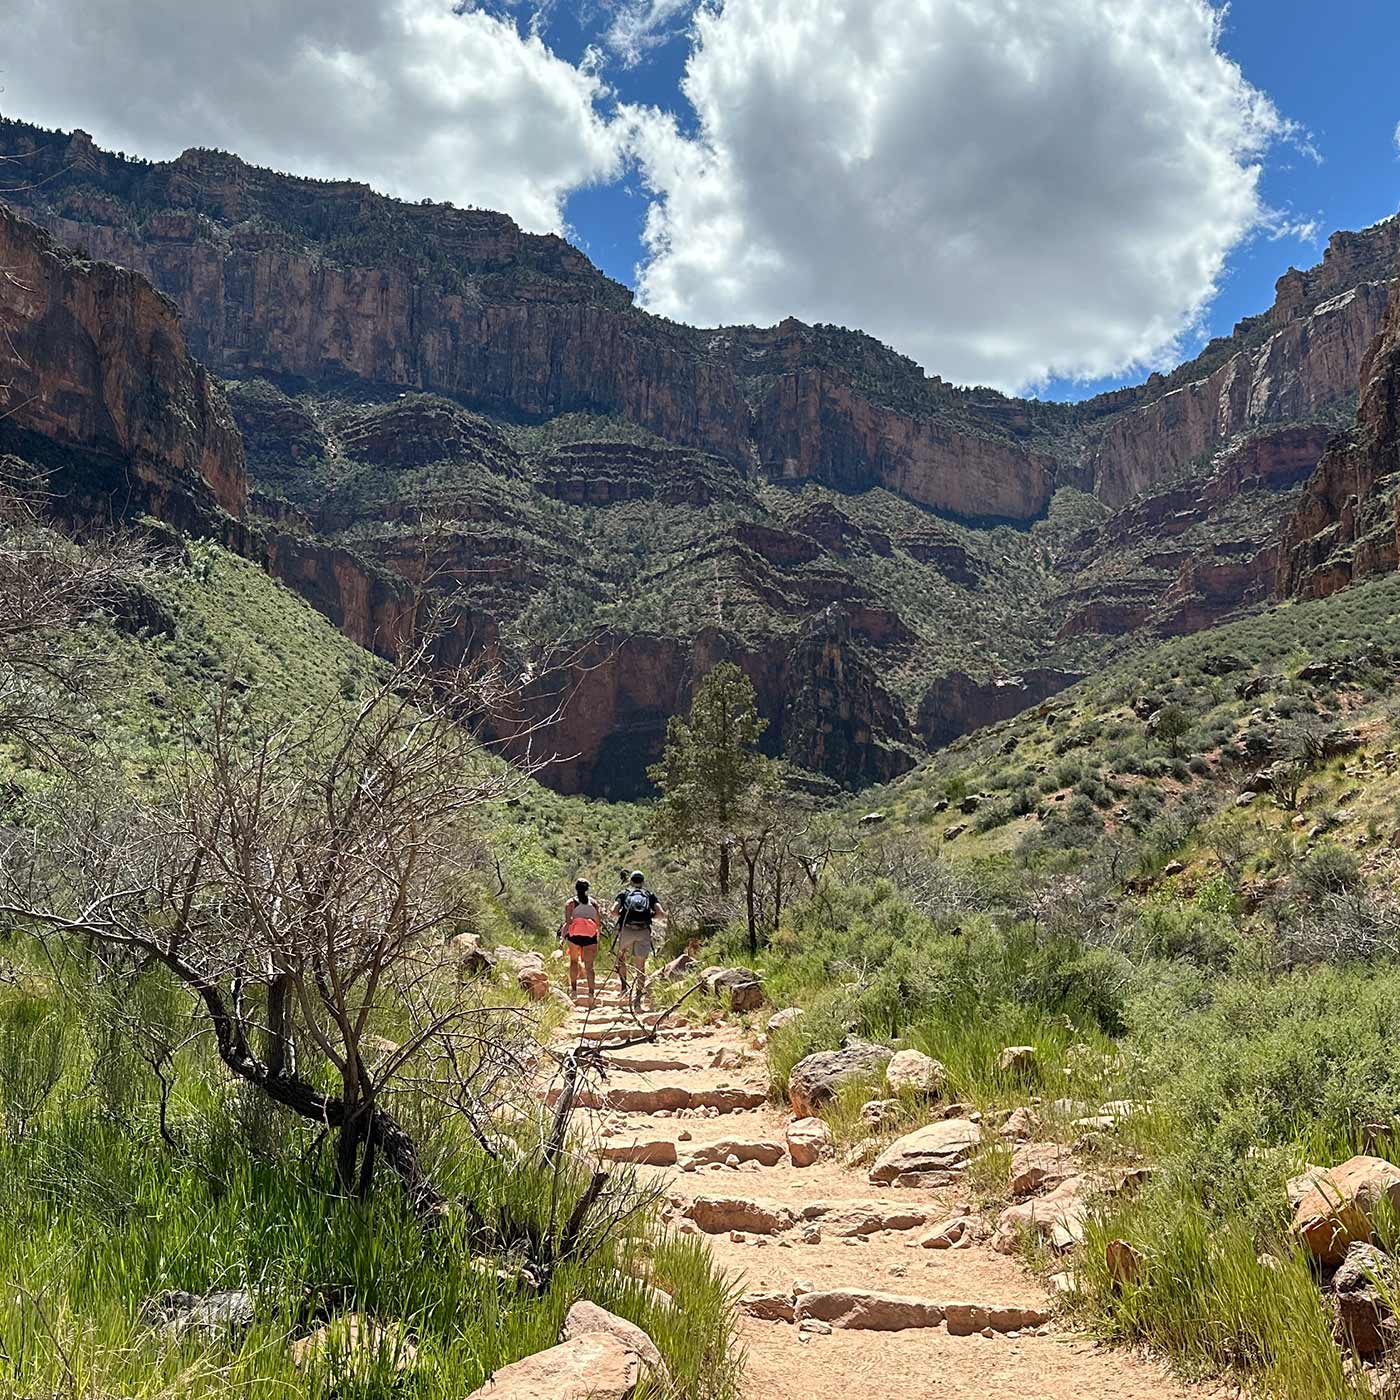 Hikers walks down a path in the Grand Canyon